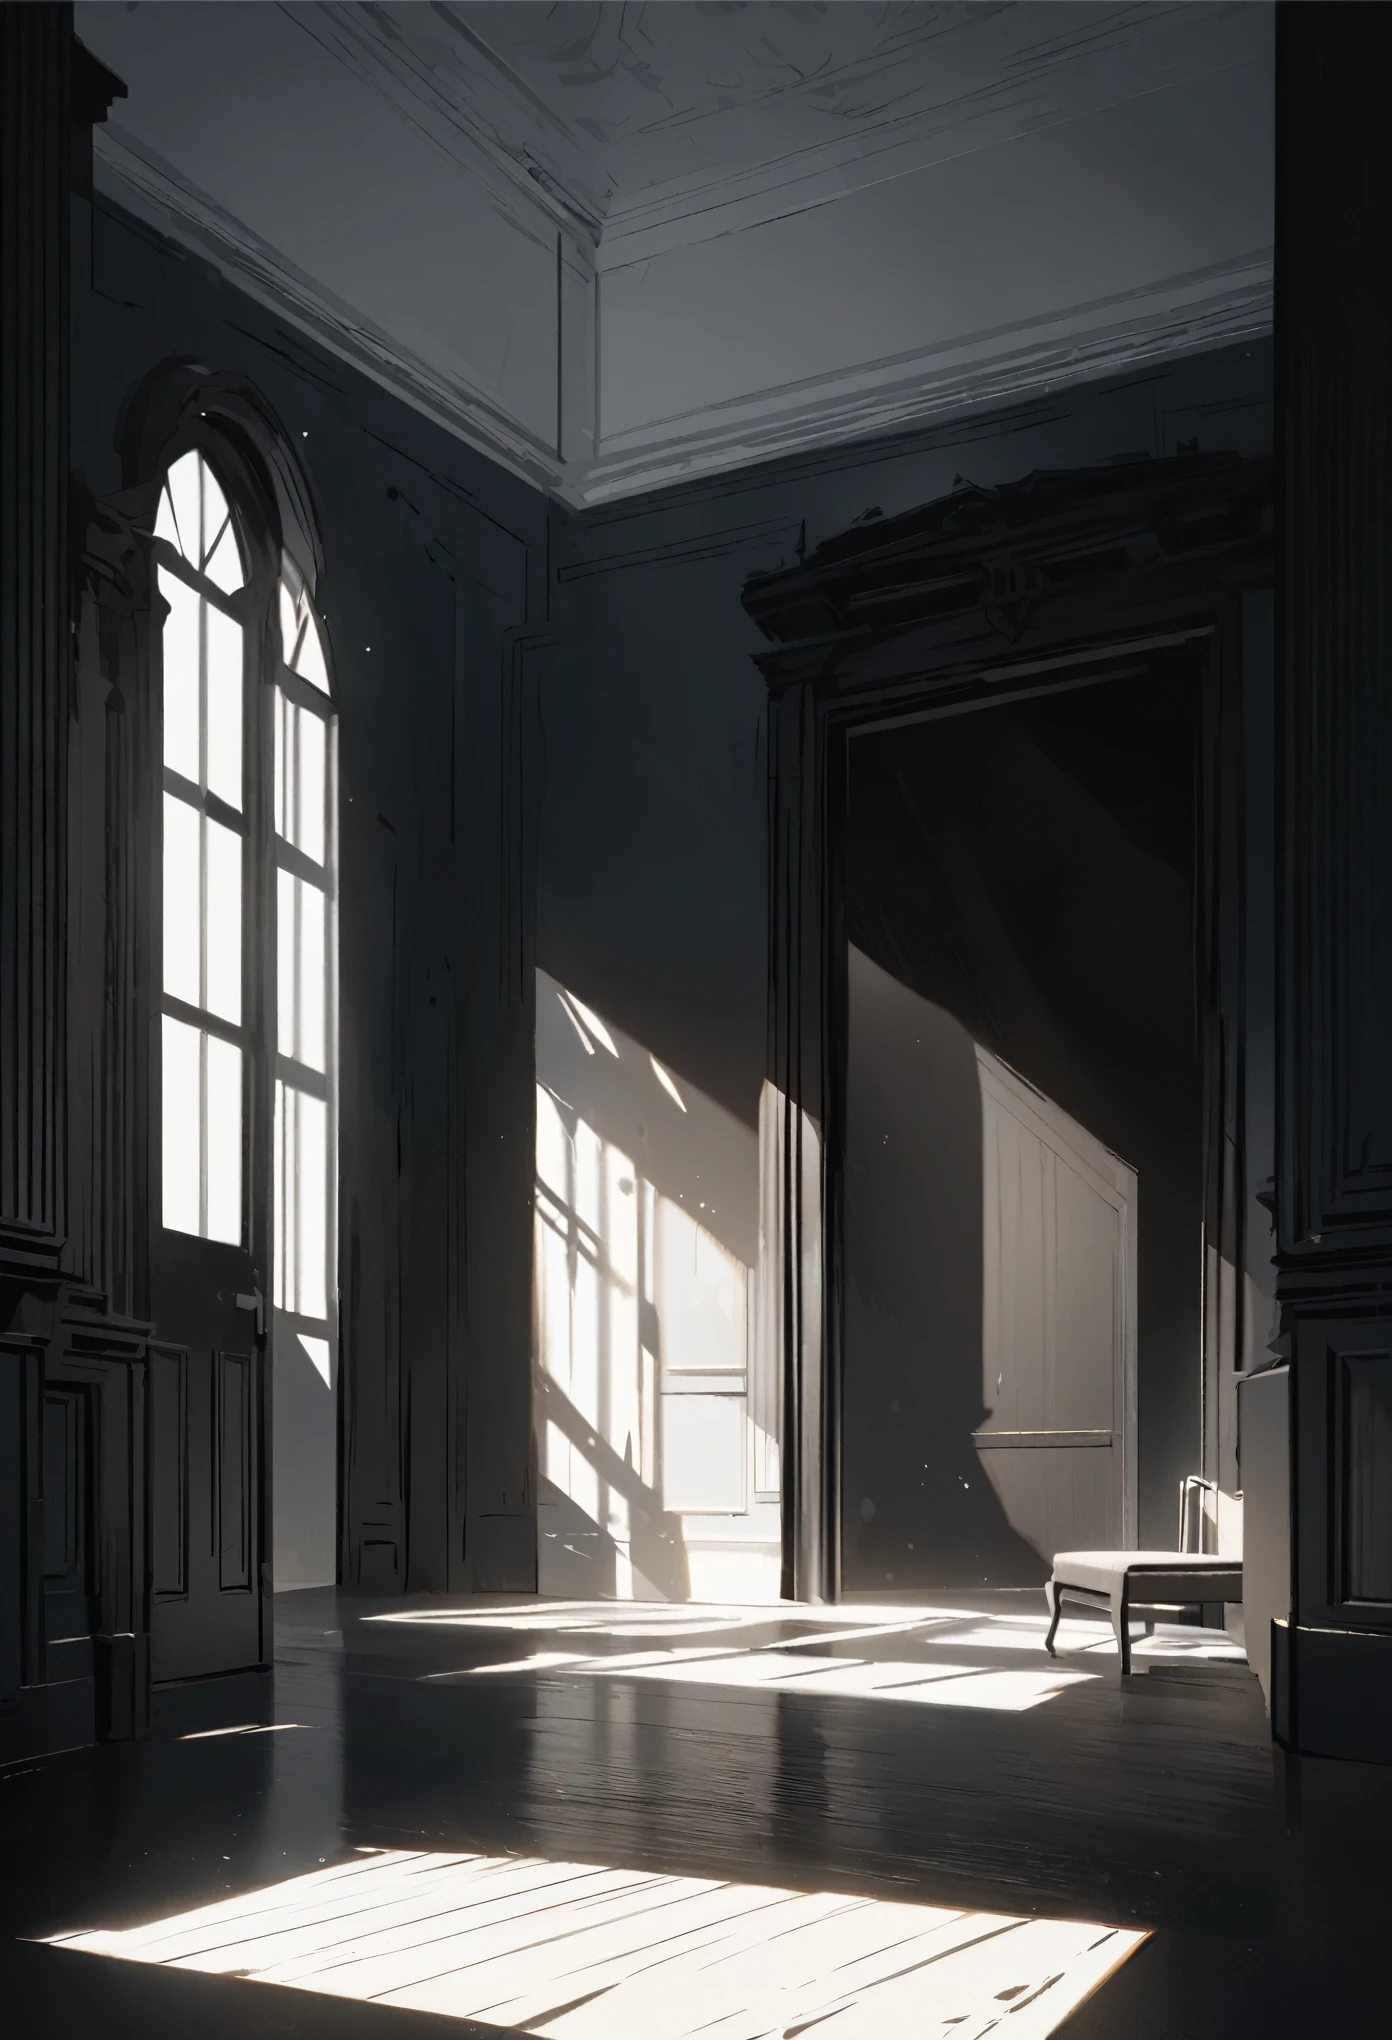 In an open room, there is an open window through which sunlight shines in, casting black shadows on the ground. There is a pure white chair in one corner of the room, which contrasts sharply with the dark tones around it. On the other side of the room, there is a black abstract painting hanging, creating a strong visual contrast with the white chair. The interplay of light and shadow fills the entire scene with a simple and elegant atmosphere. The black and white contrast makes every detail stand out, with rooms, windows, sunlight, white chairs, black abstract paintings, intertwined light and shadow, strong contrast, simplicity, and elegance,(masterpiece, best quality:1.2), extremly detailed